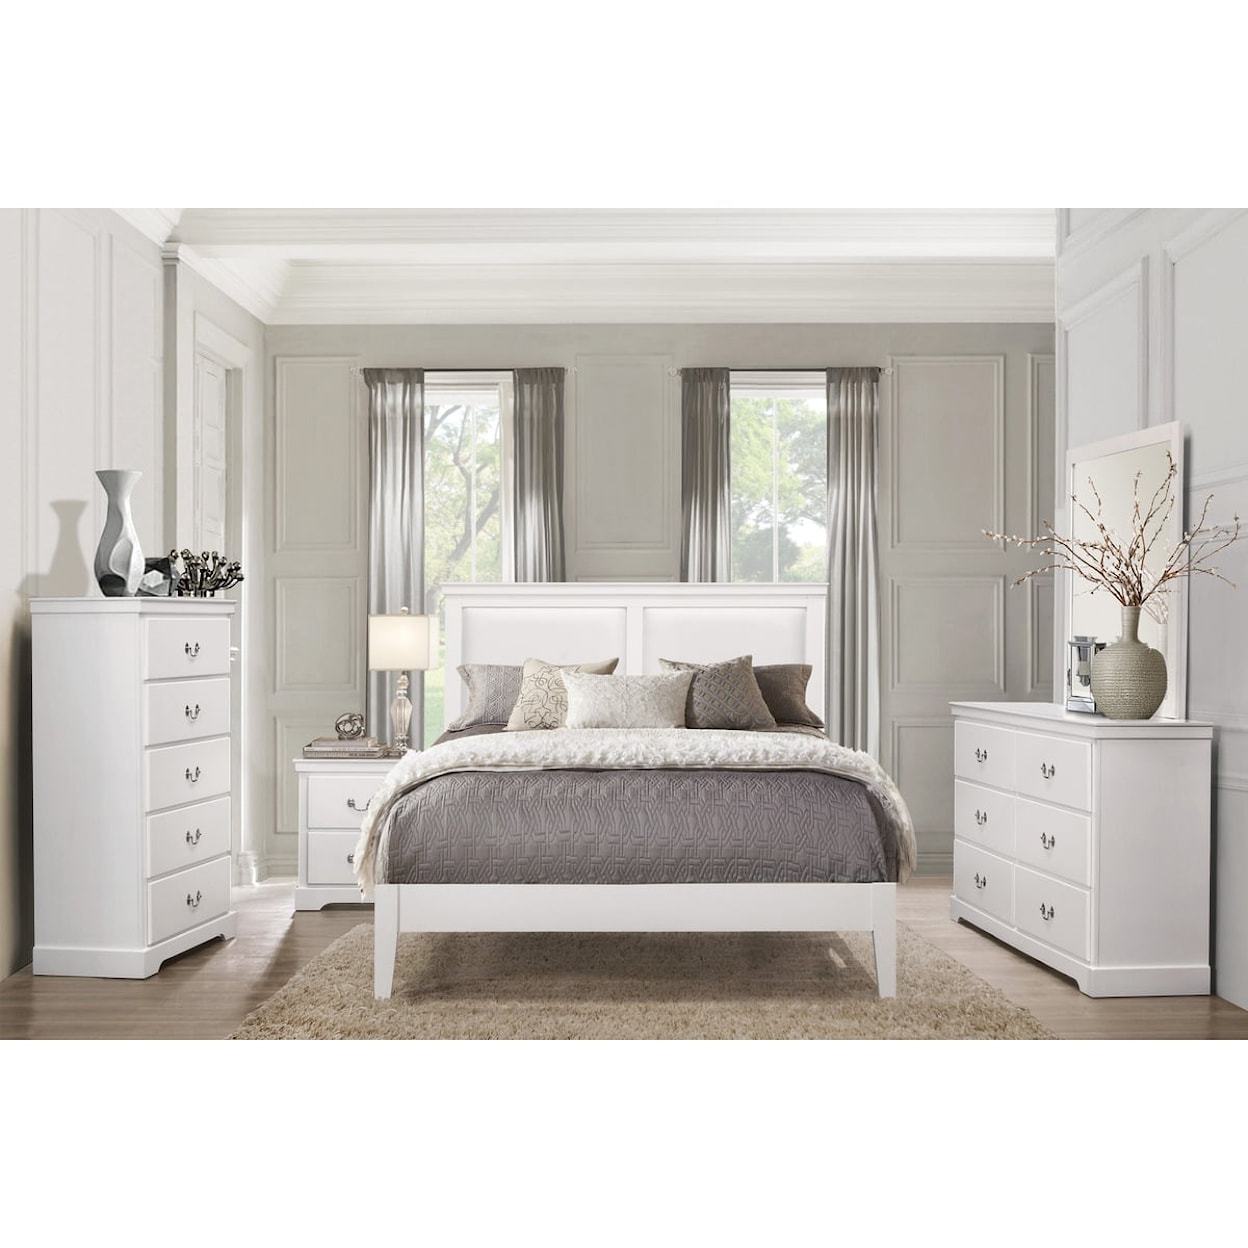 Homelegance Furniture Seabright Queen Bed